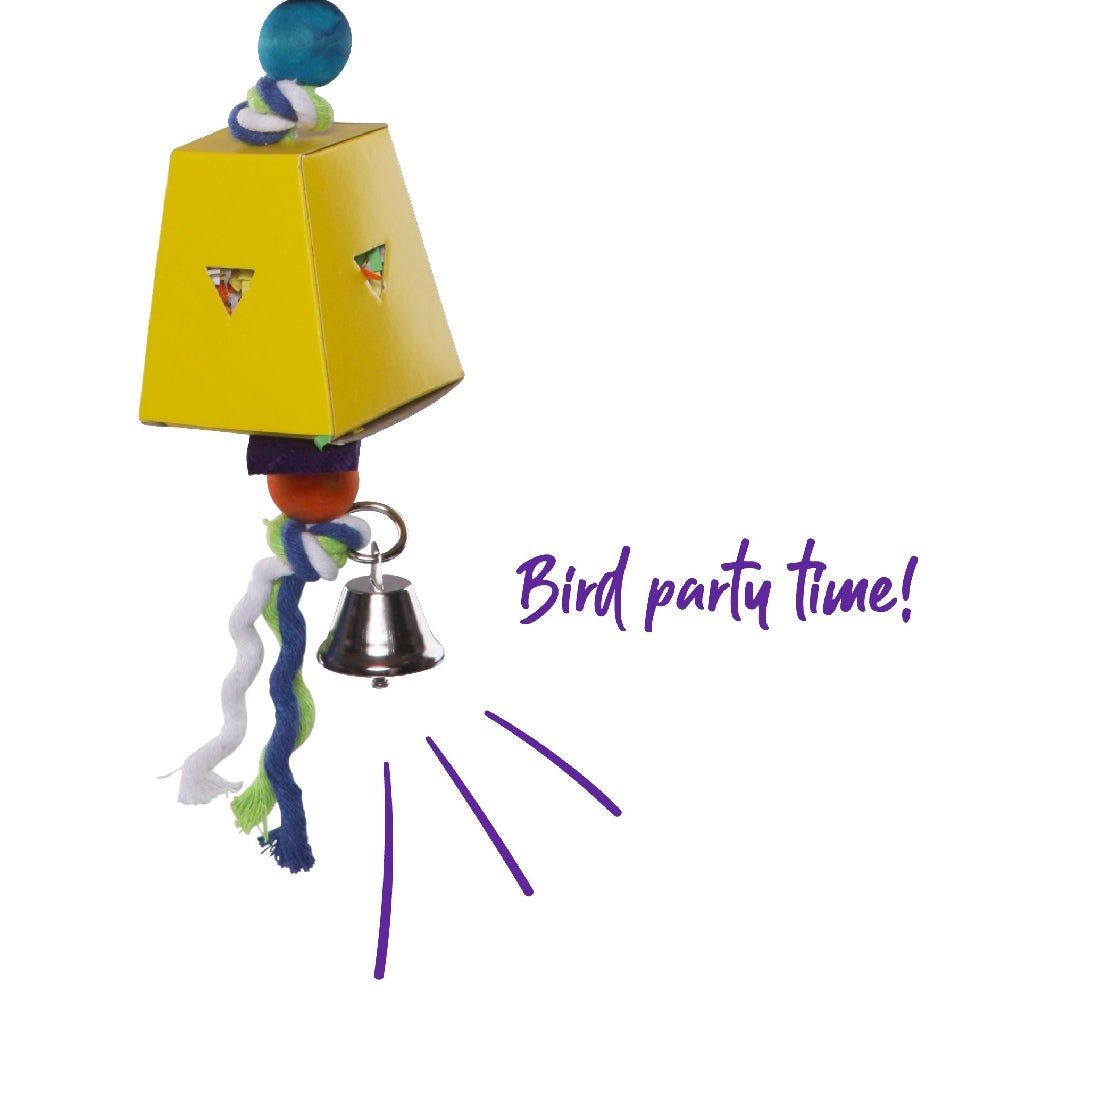 Colorful bird toy with lampshade shape, beads, and bell on white background.